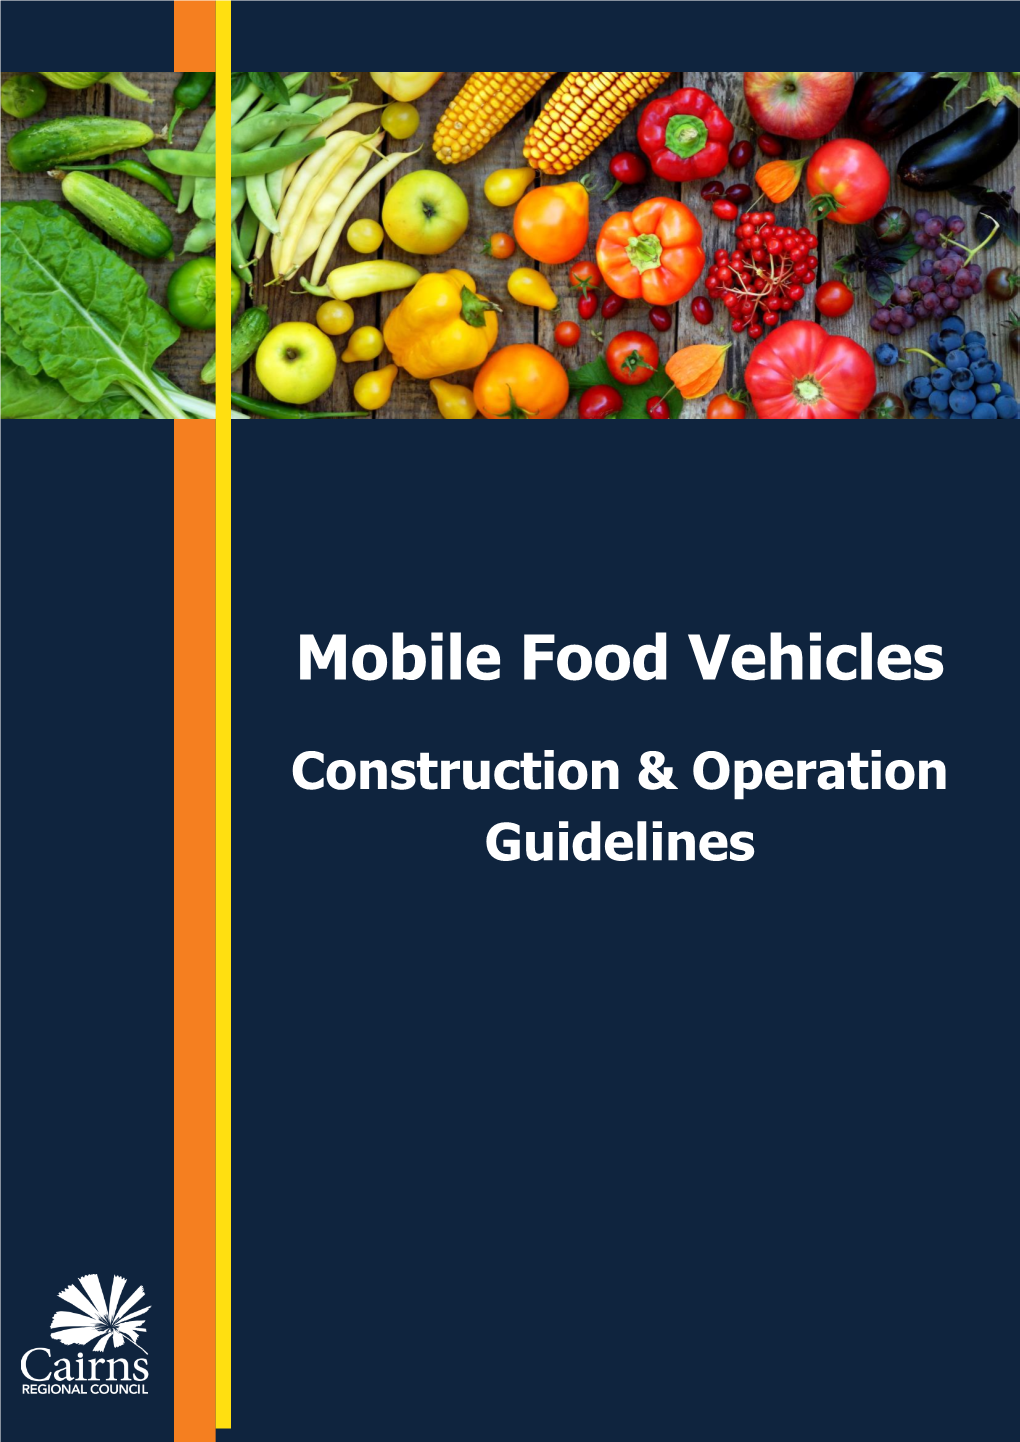 Mobile Food Vehicle Construction and Operation Guidelines